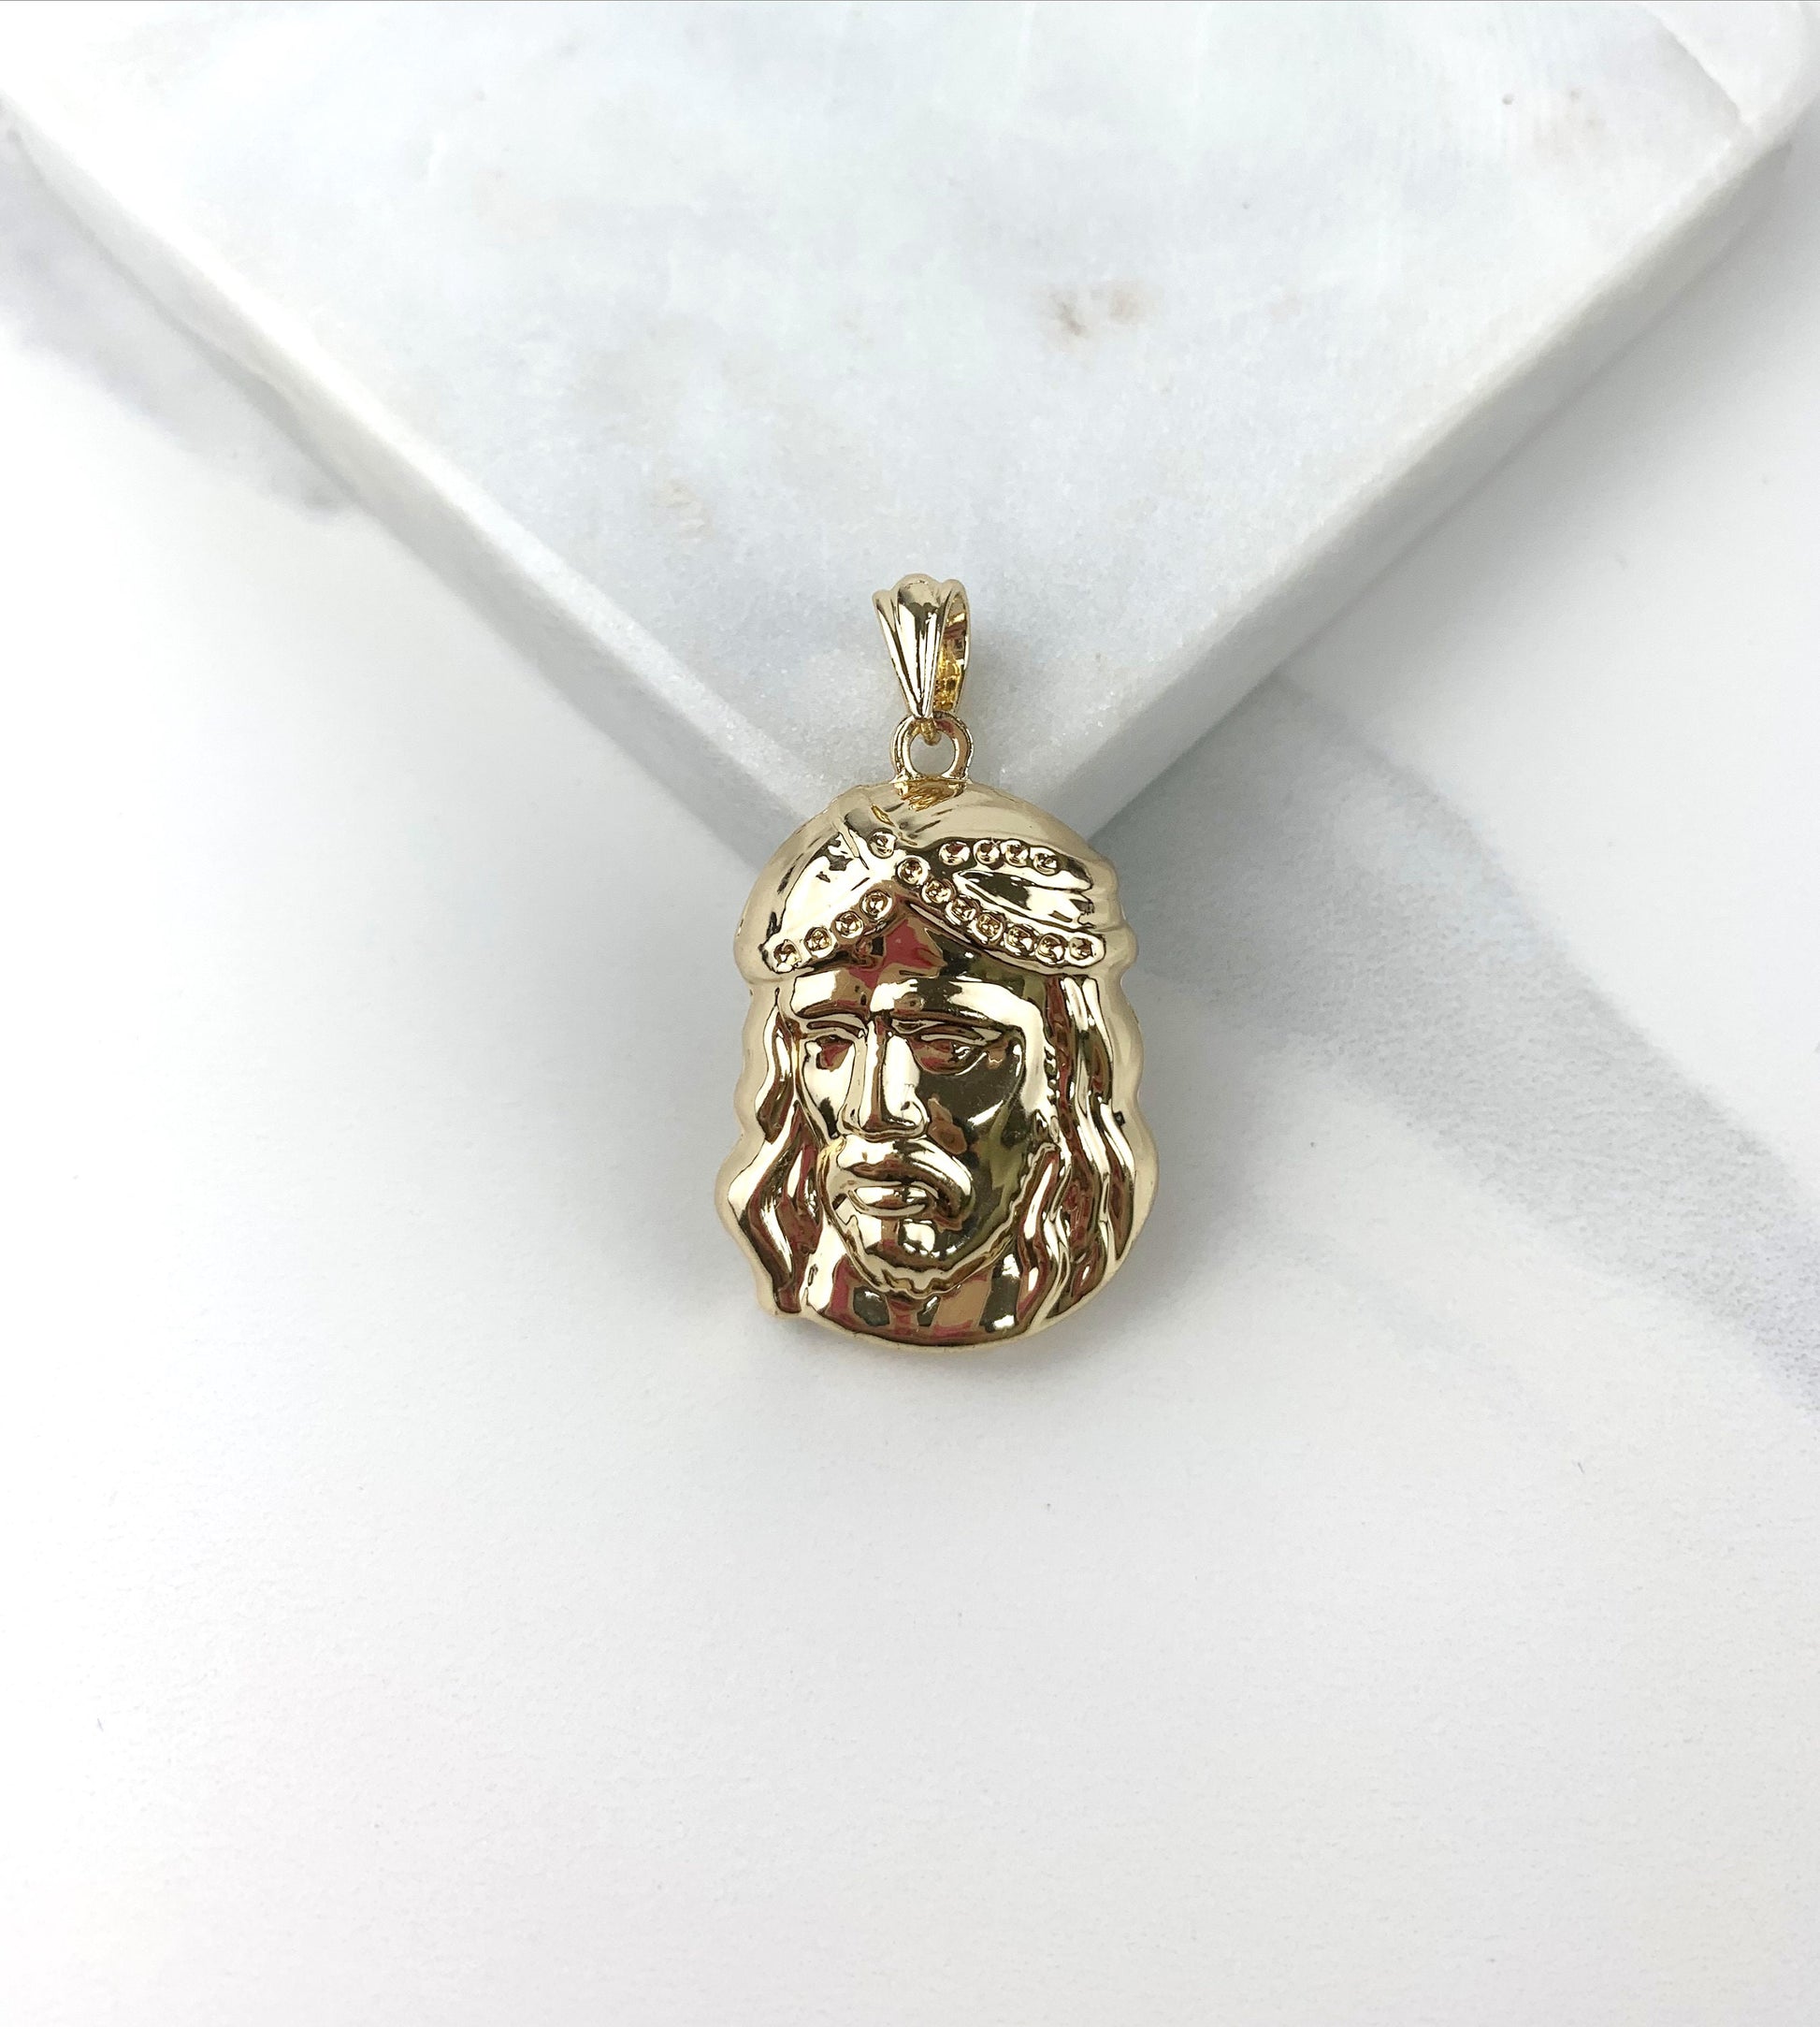 18k Gold Filled Christ Head Charms Pendants Wholesale Jewelry Supplies